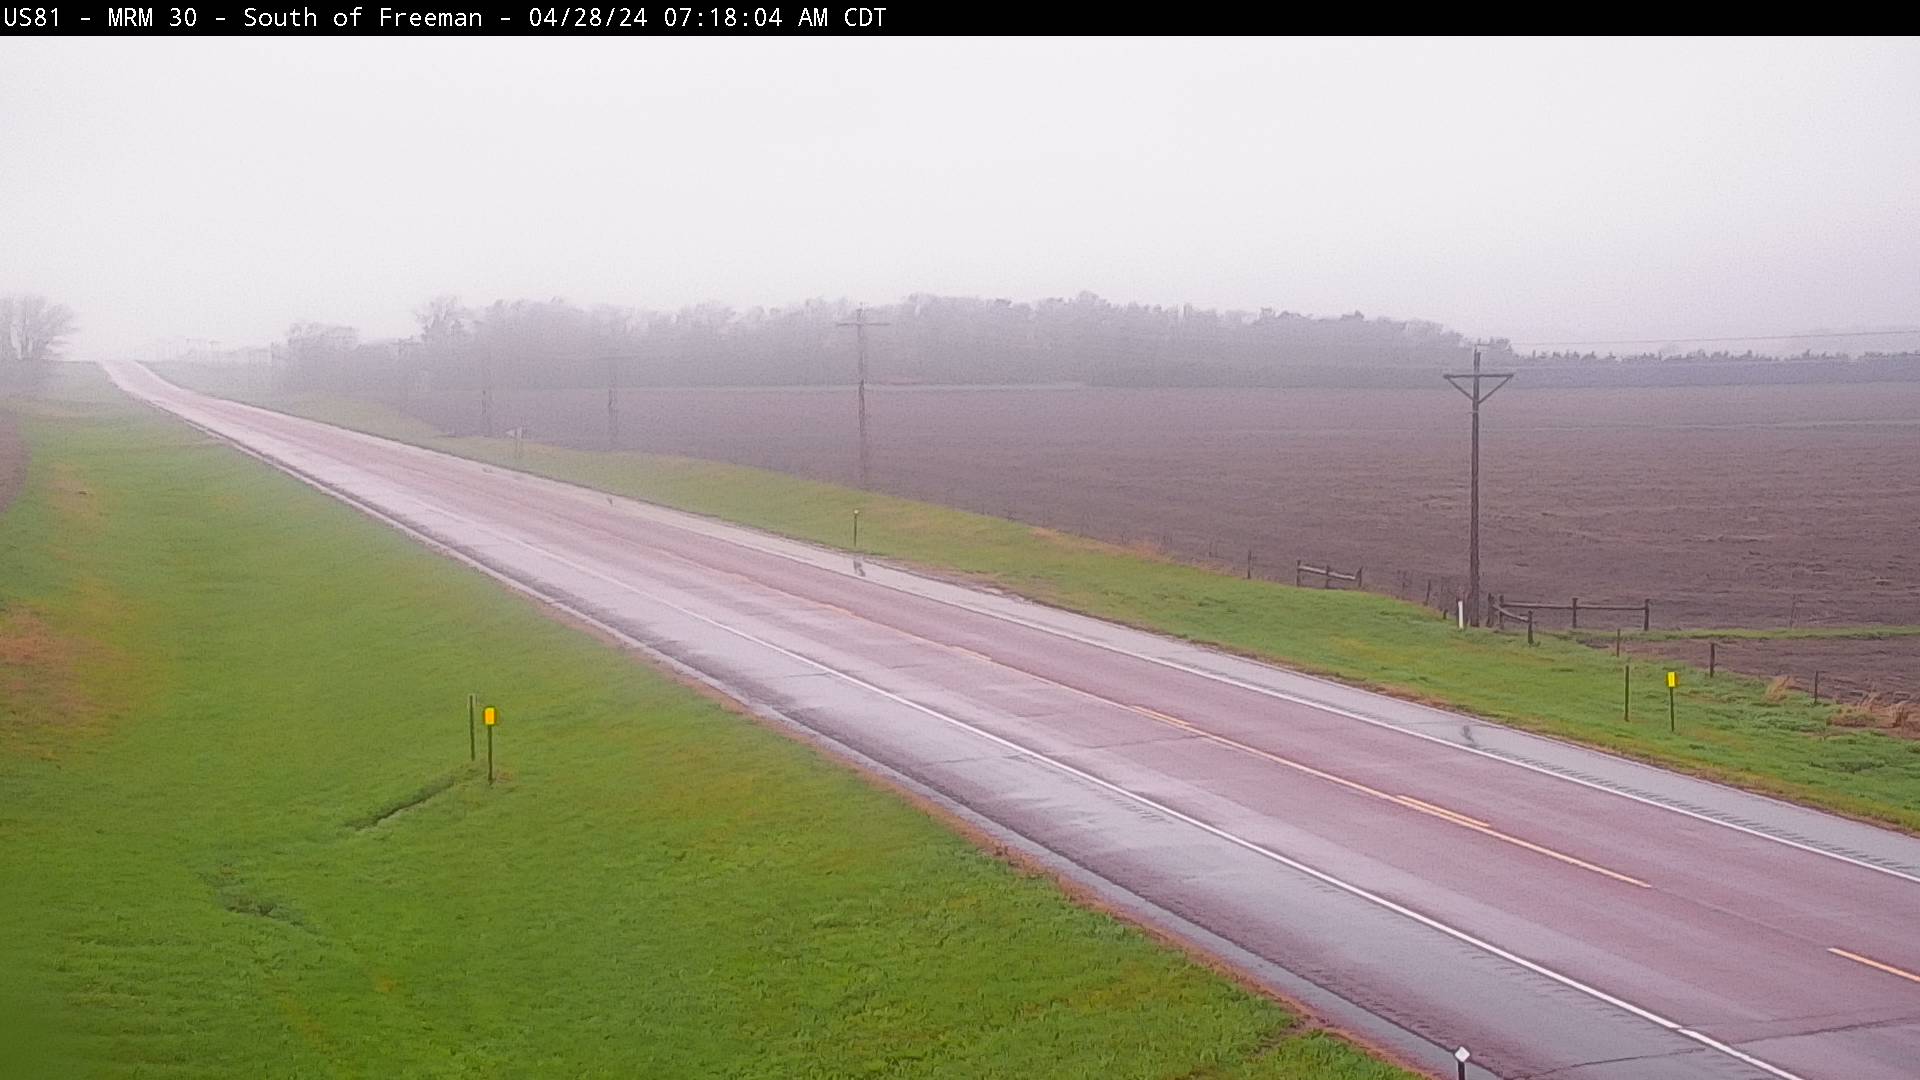 4 miles south of town along US-81 @ MP 30 - South Traffic Camera